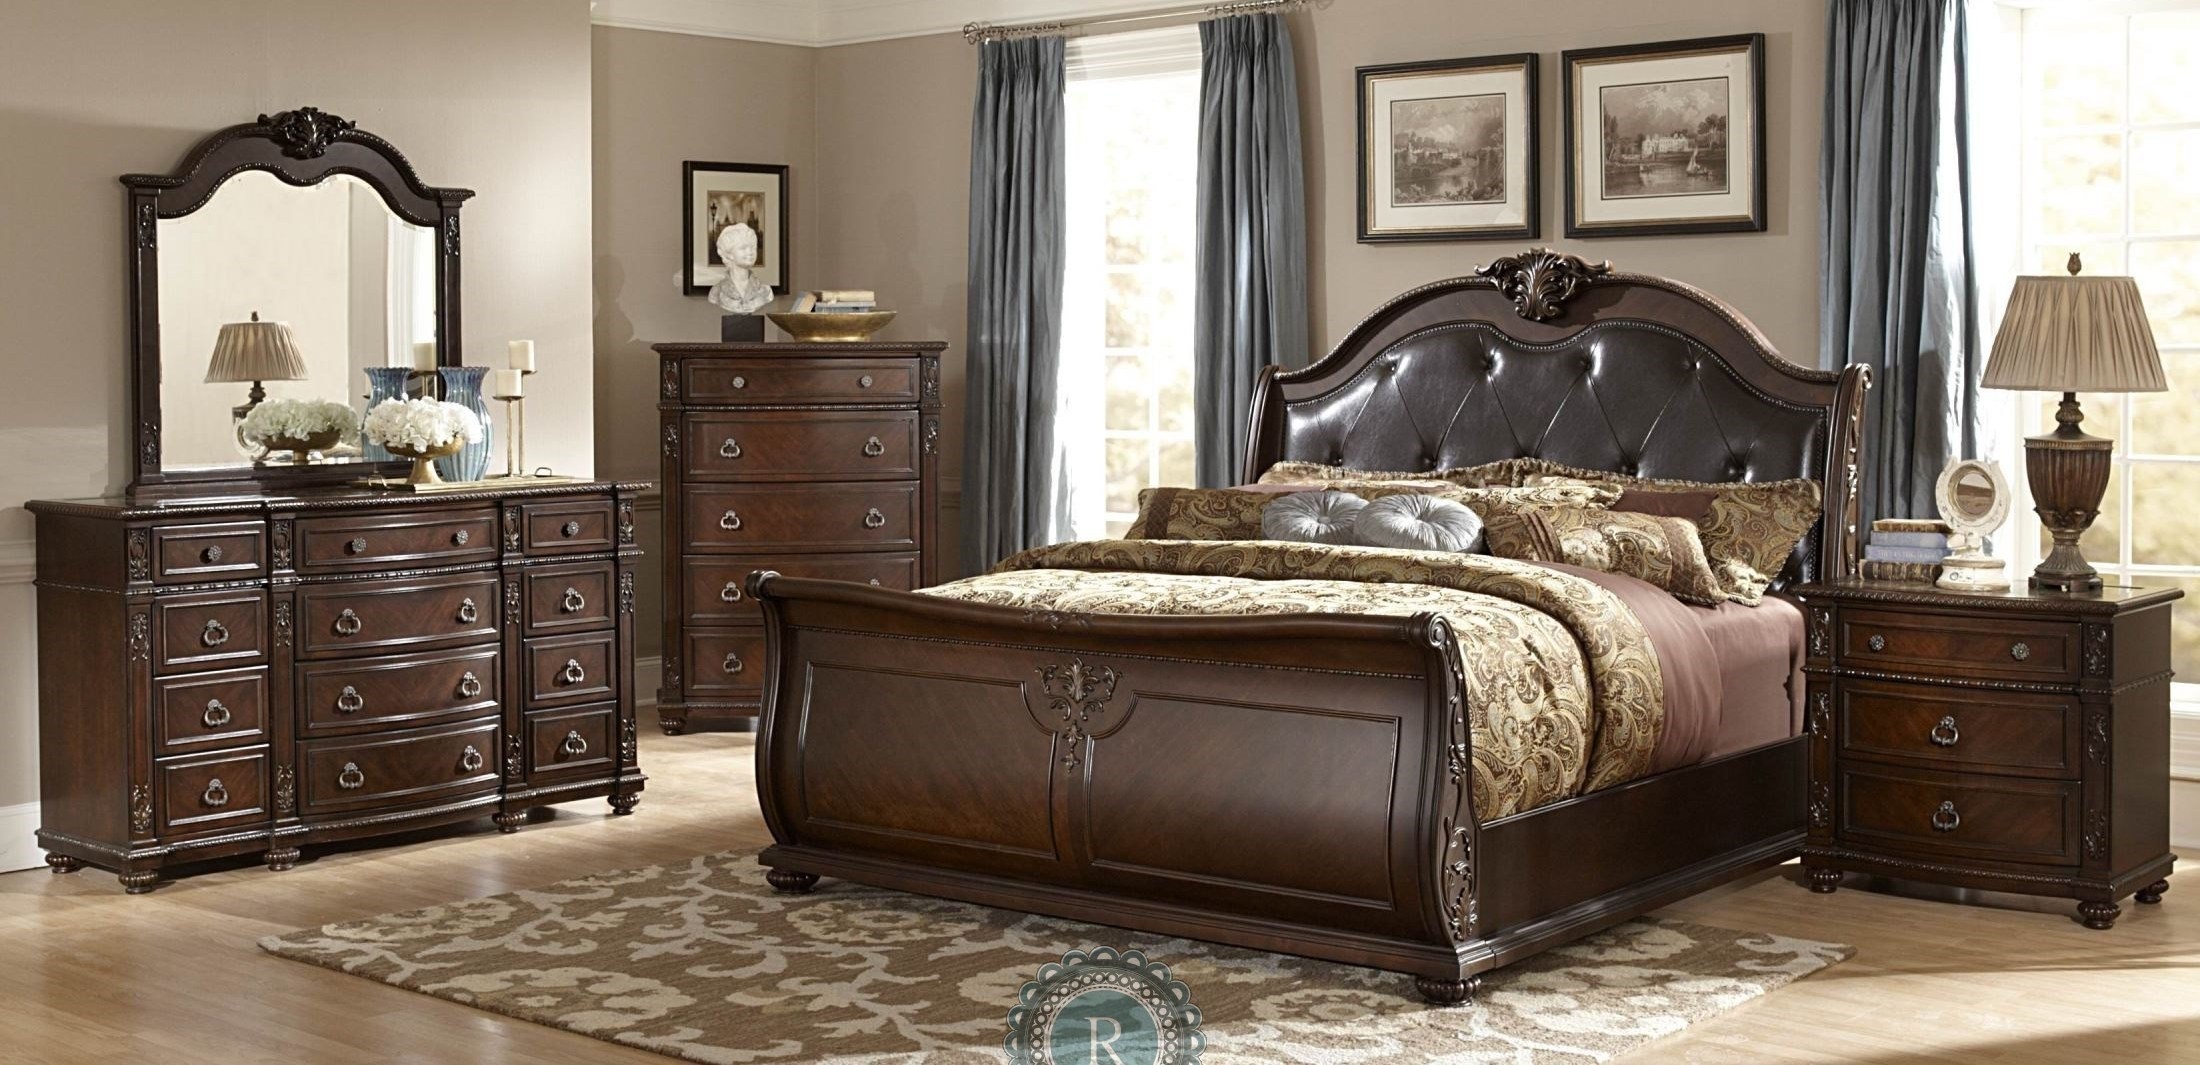 Hillcrest manor genuine leather sleigh bedroom set from